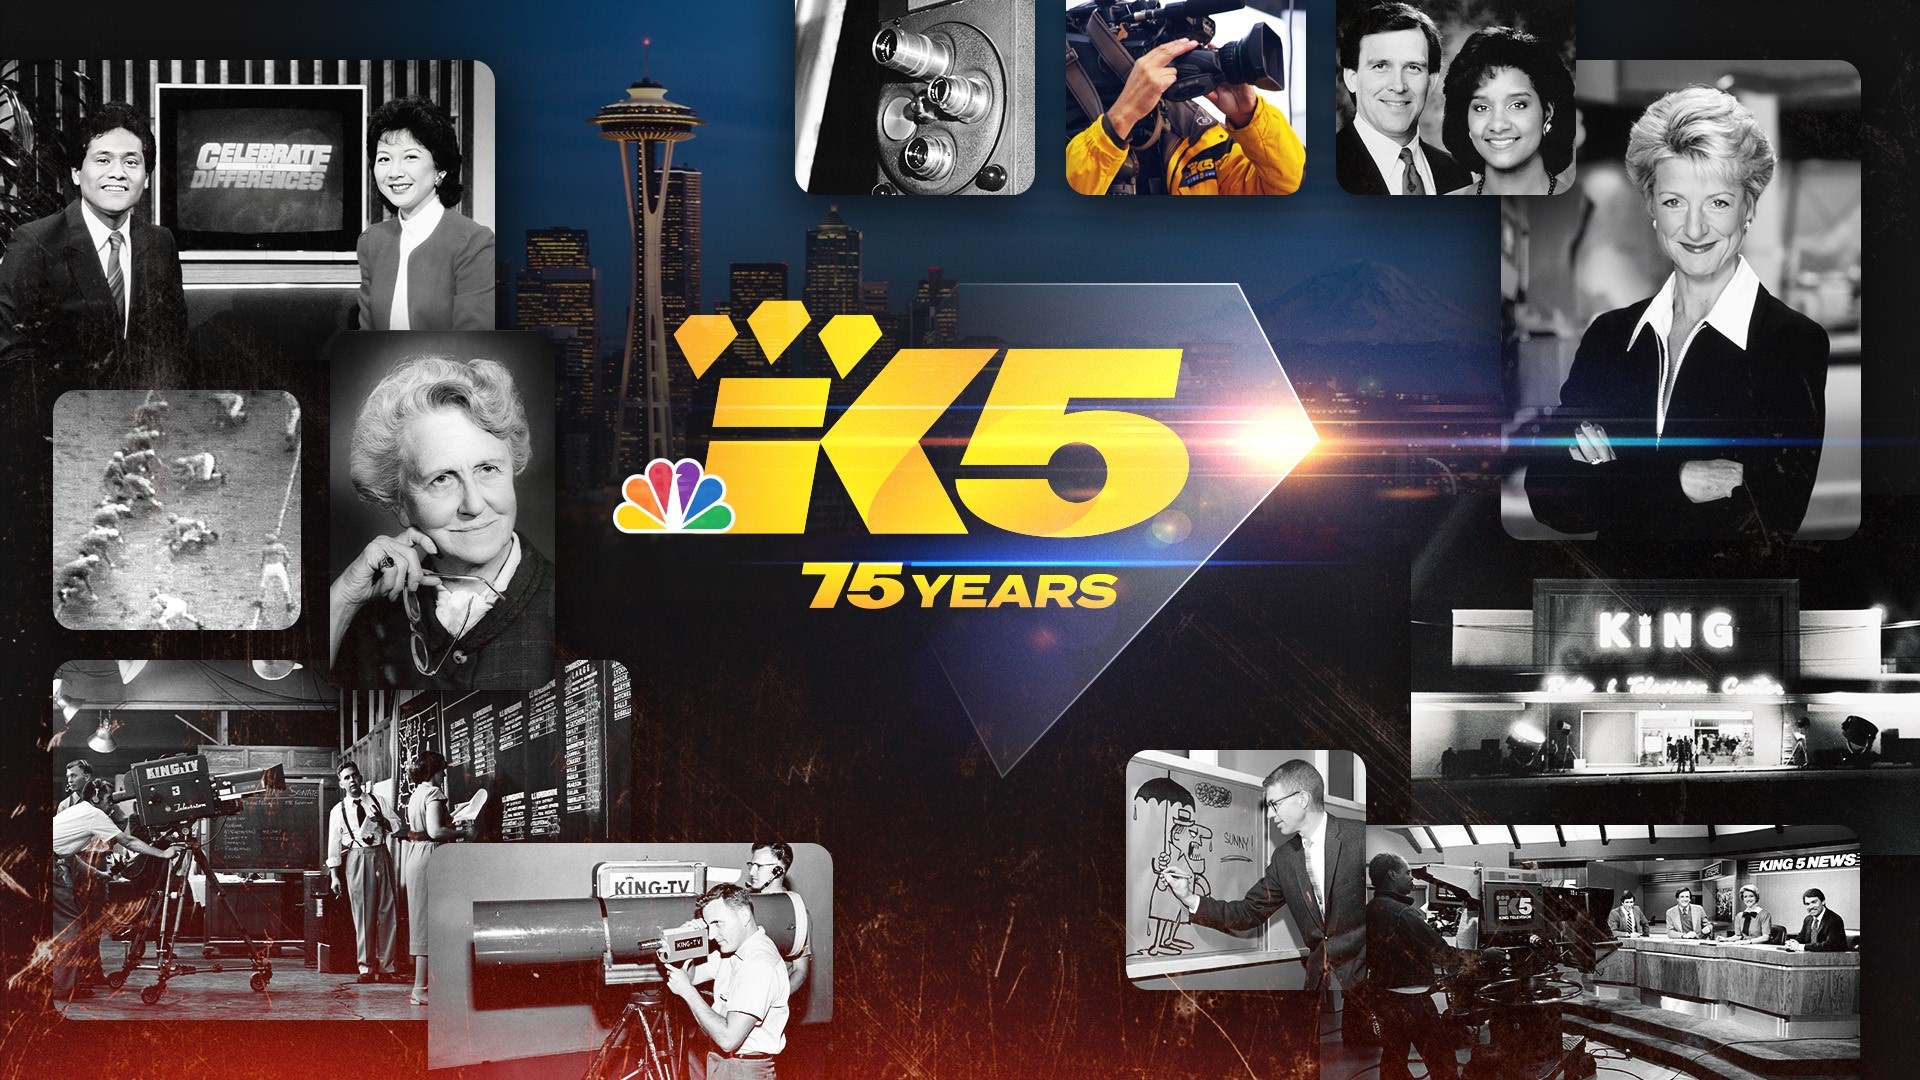 This November, KING 5 celebrates 75 years of broadcasting. It was the first TV station in Washington state.